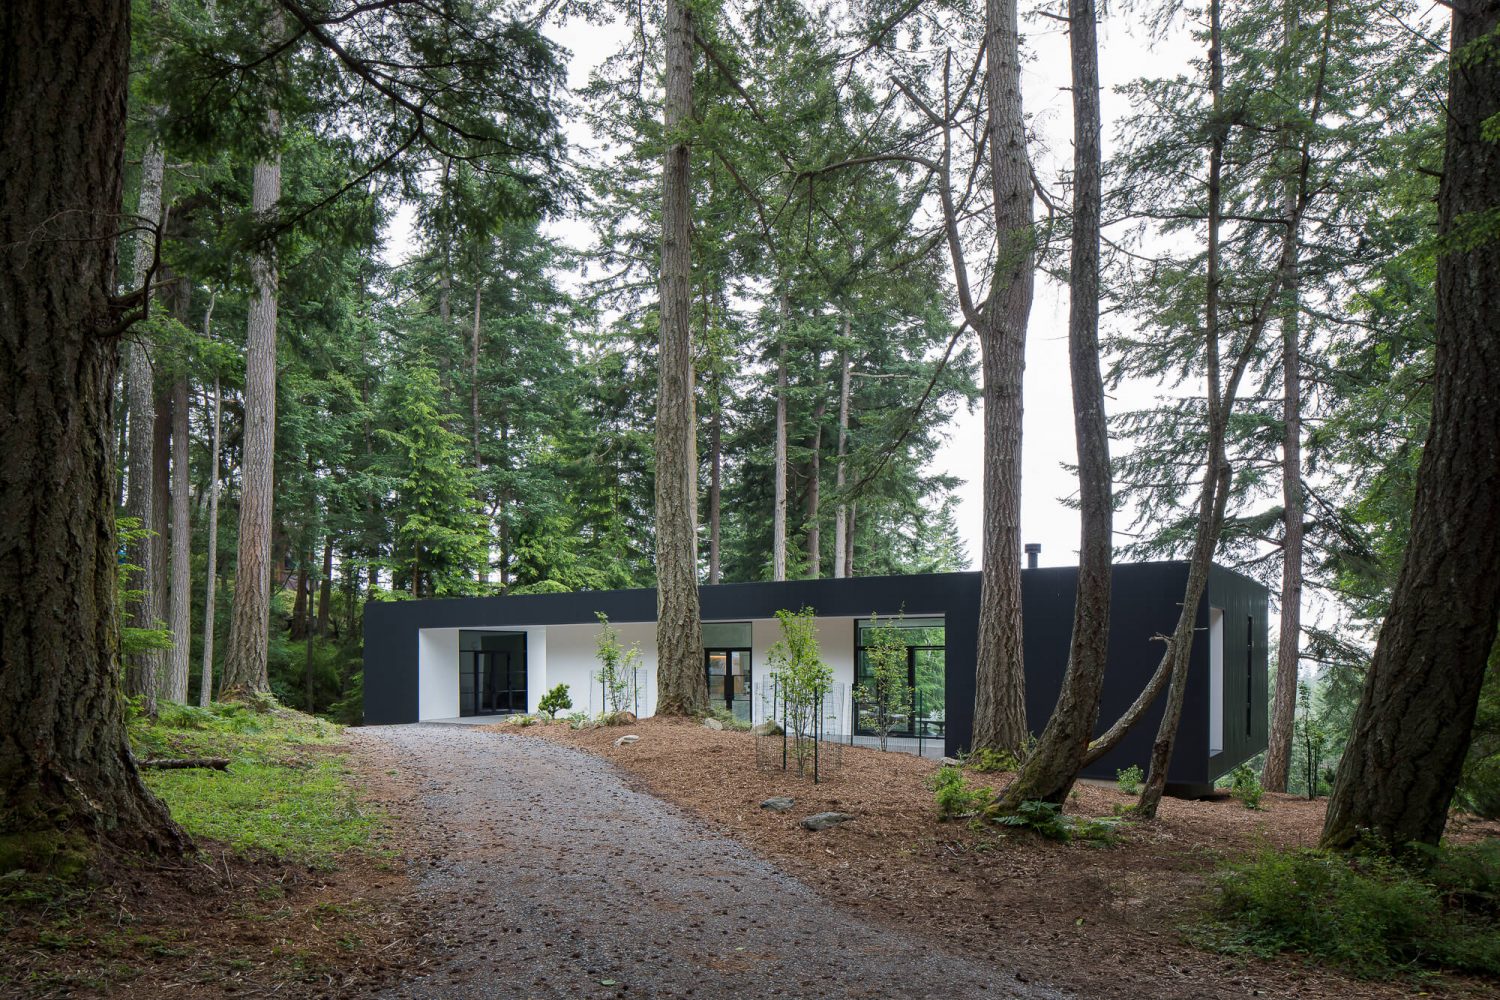 Collector's Retreat by Heliotrope Architects